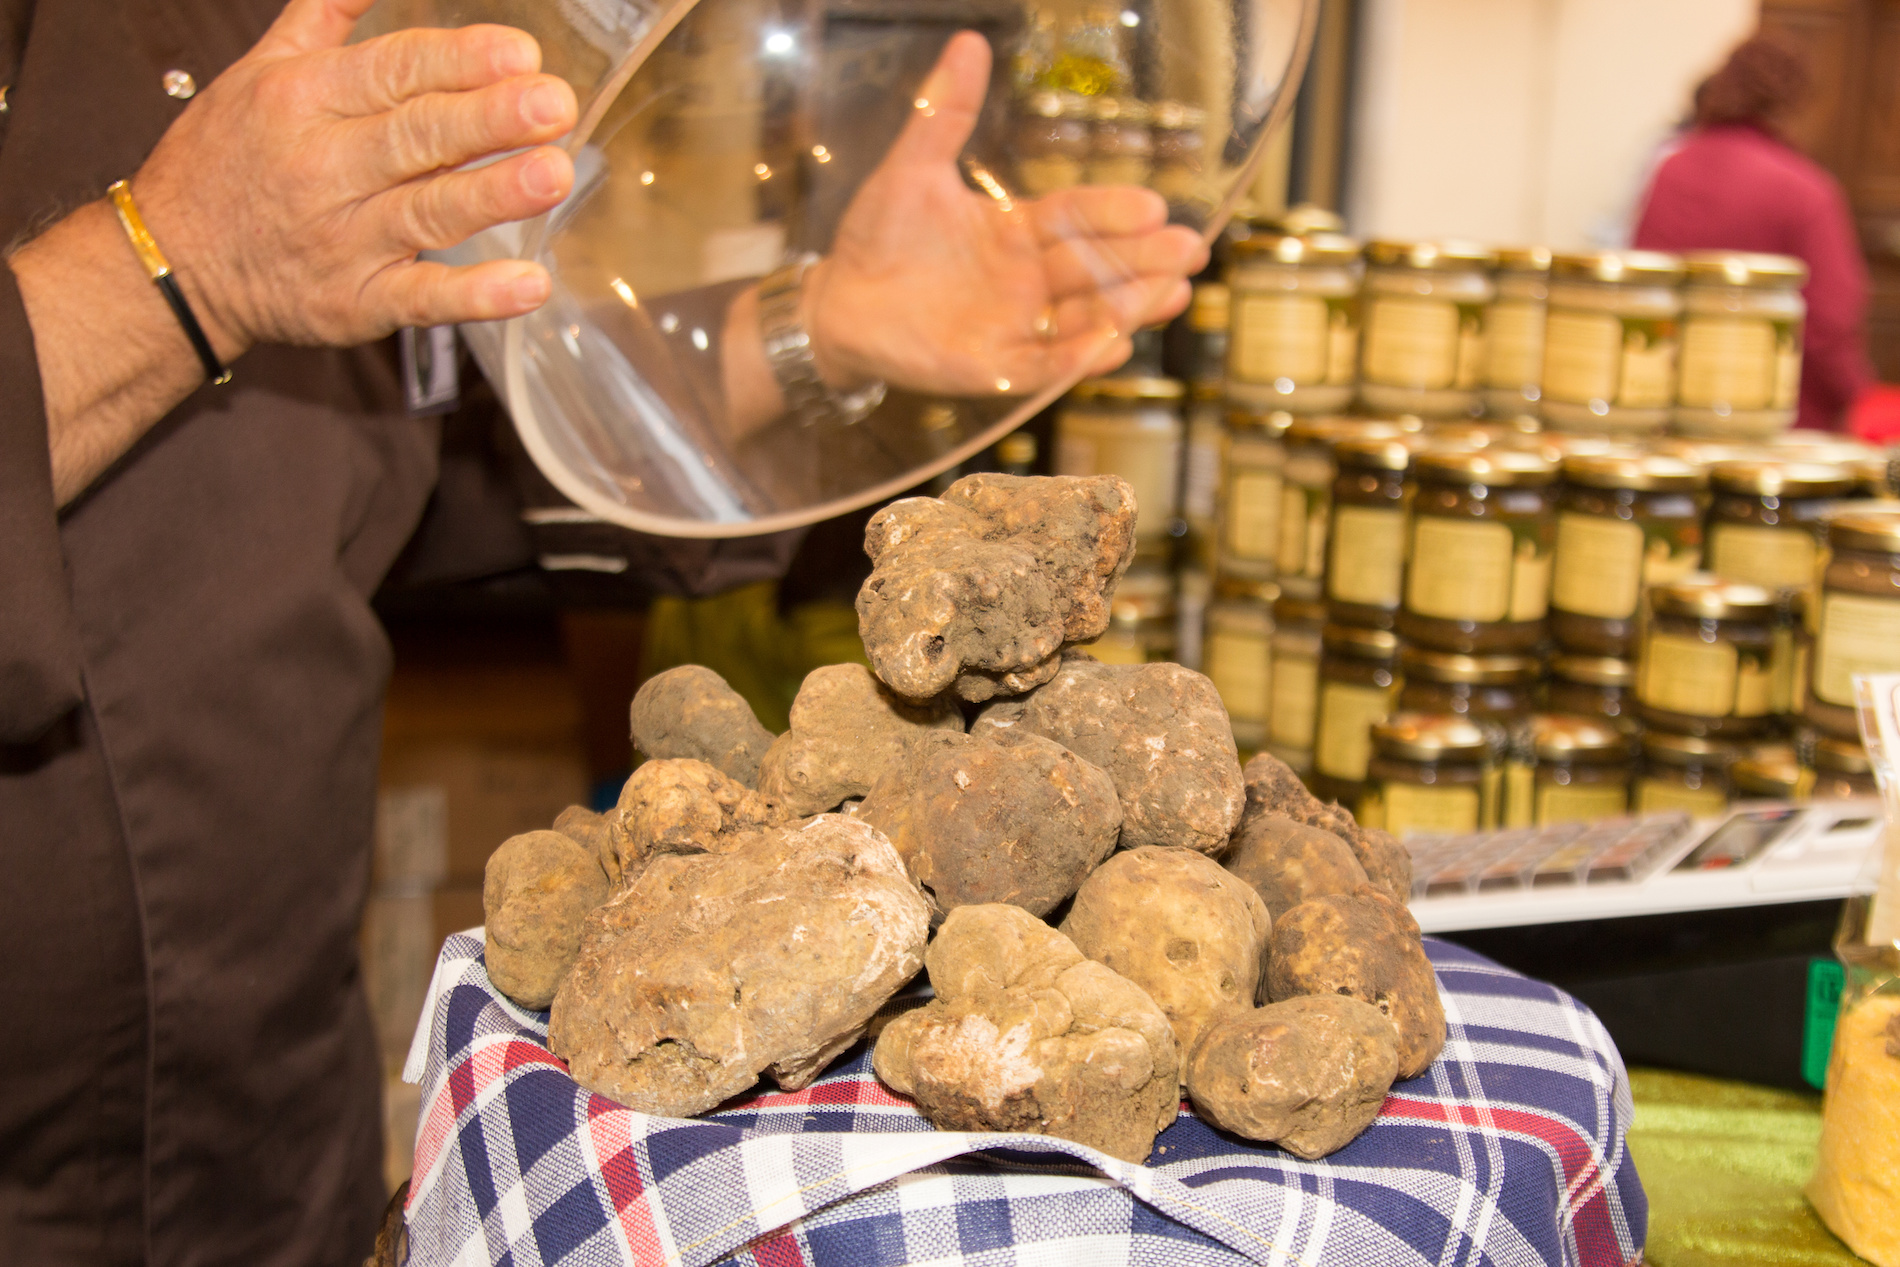 A pile of truffles on a table